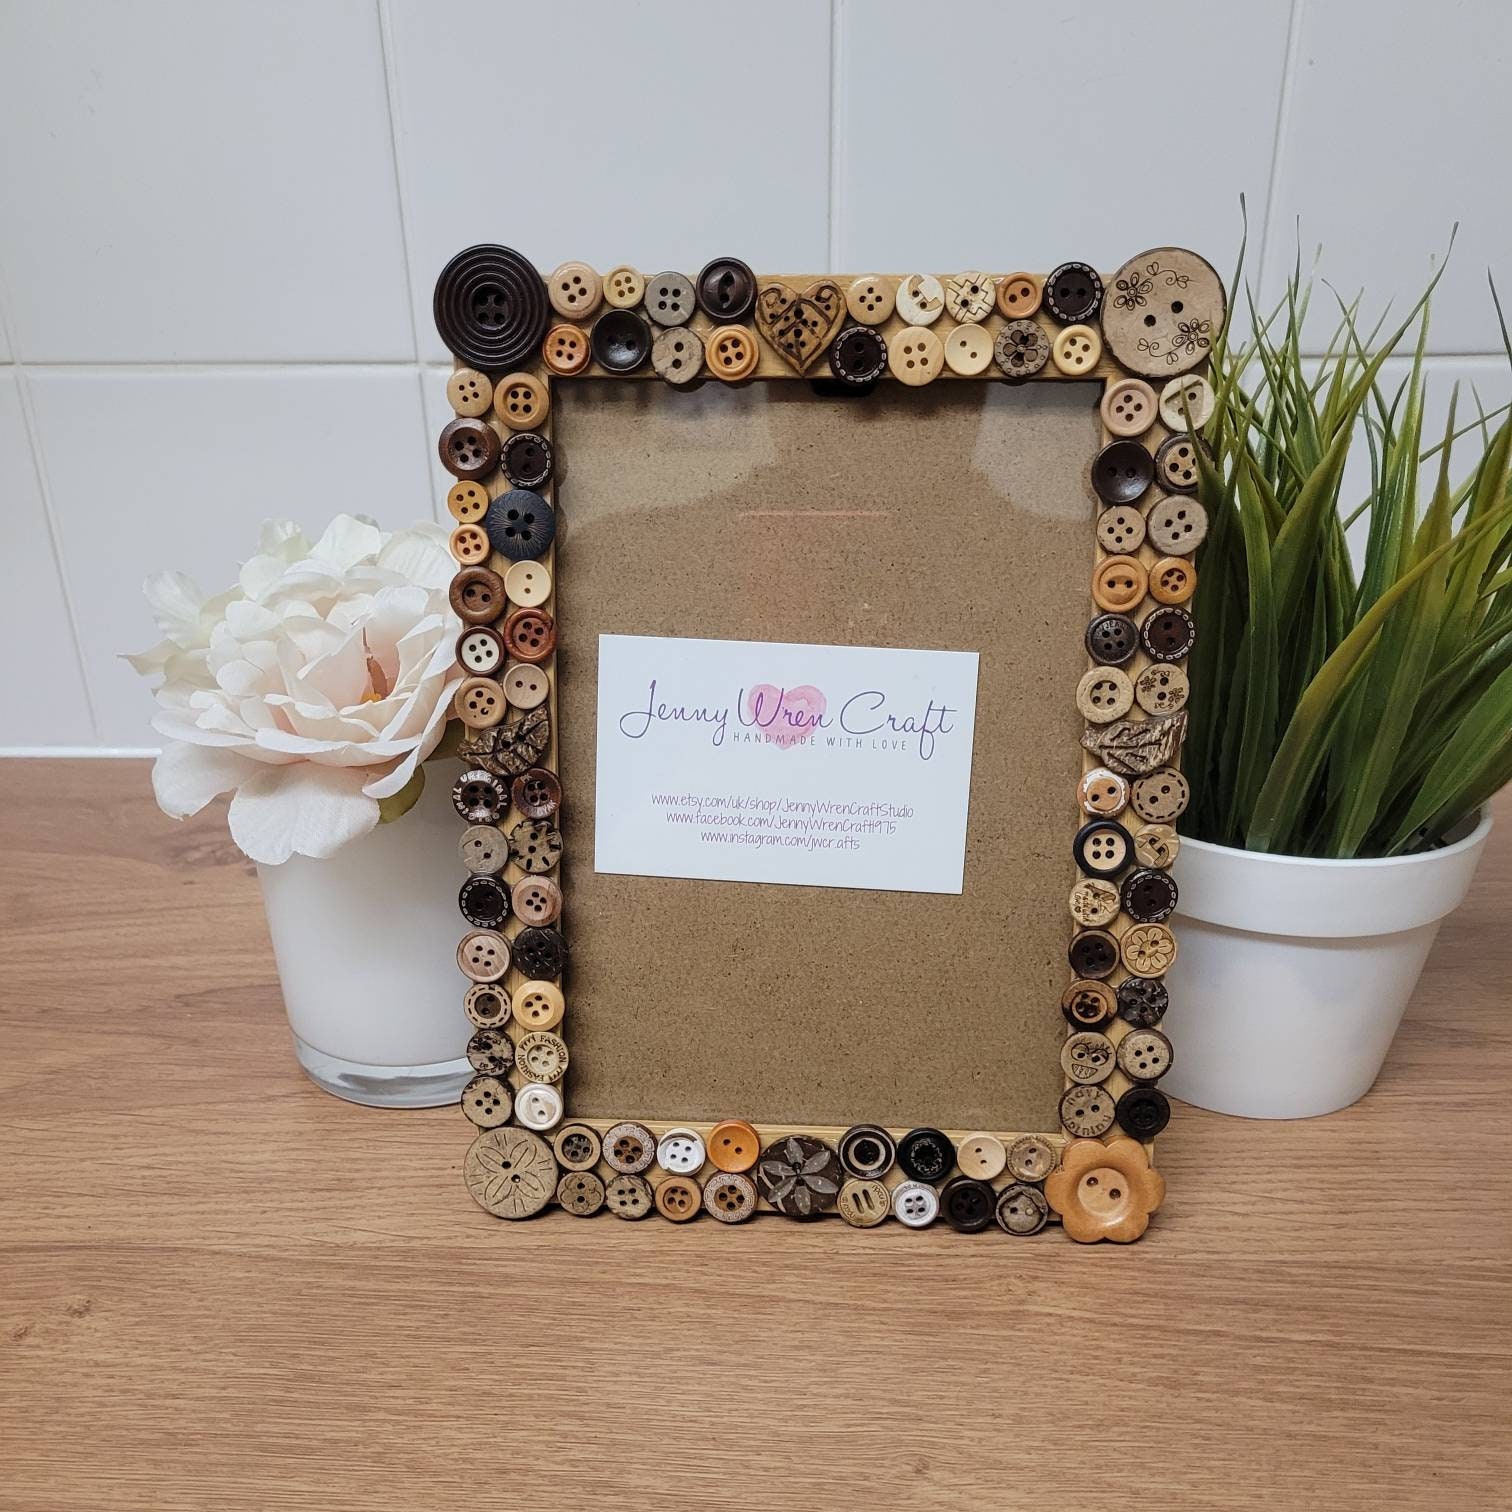 Recycled Natural Wooden Button Photo Frame 5 X 7 Inches pic picture